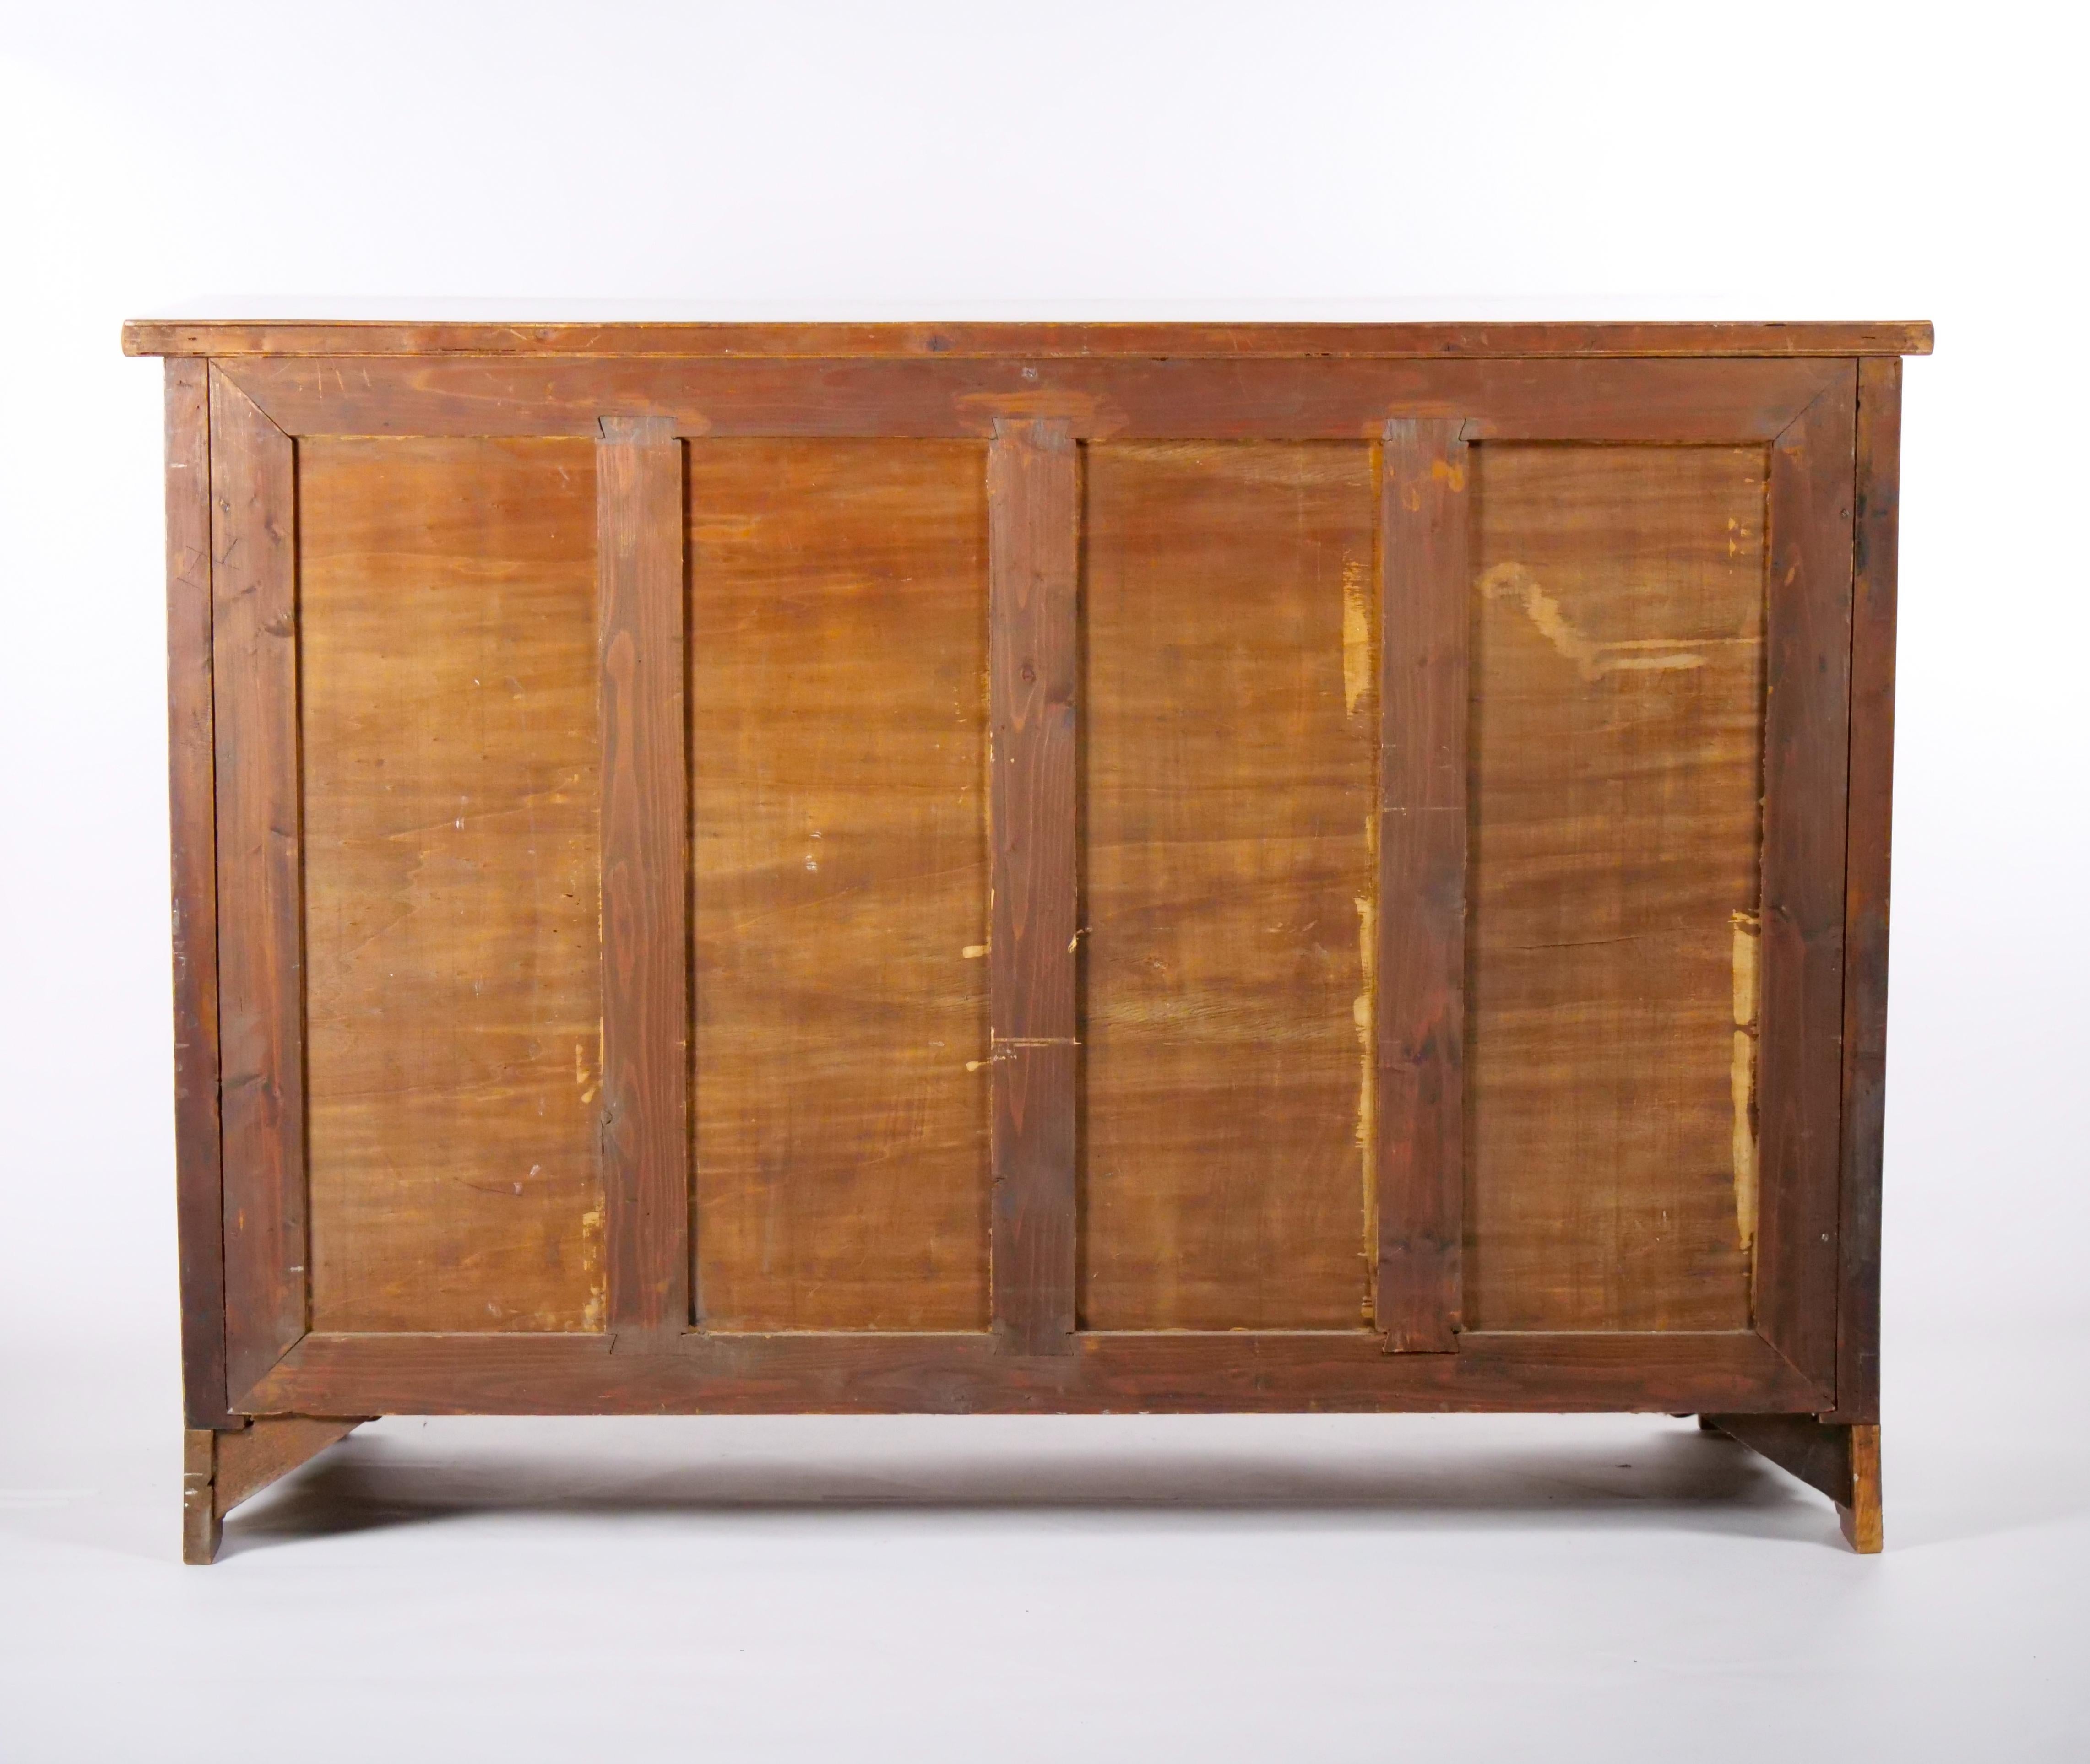 Fine Quality French Parquetry / Marquetry Inlaid Sideboard / Server Cabinet 5